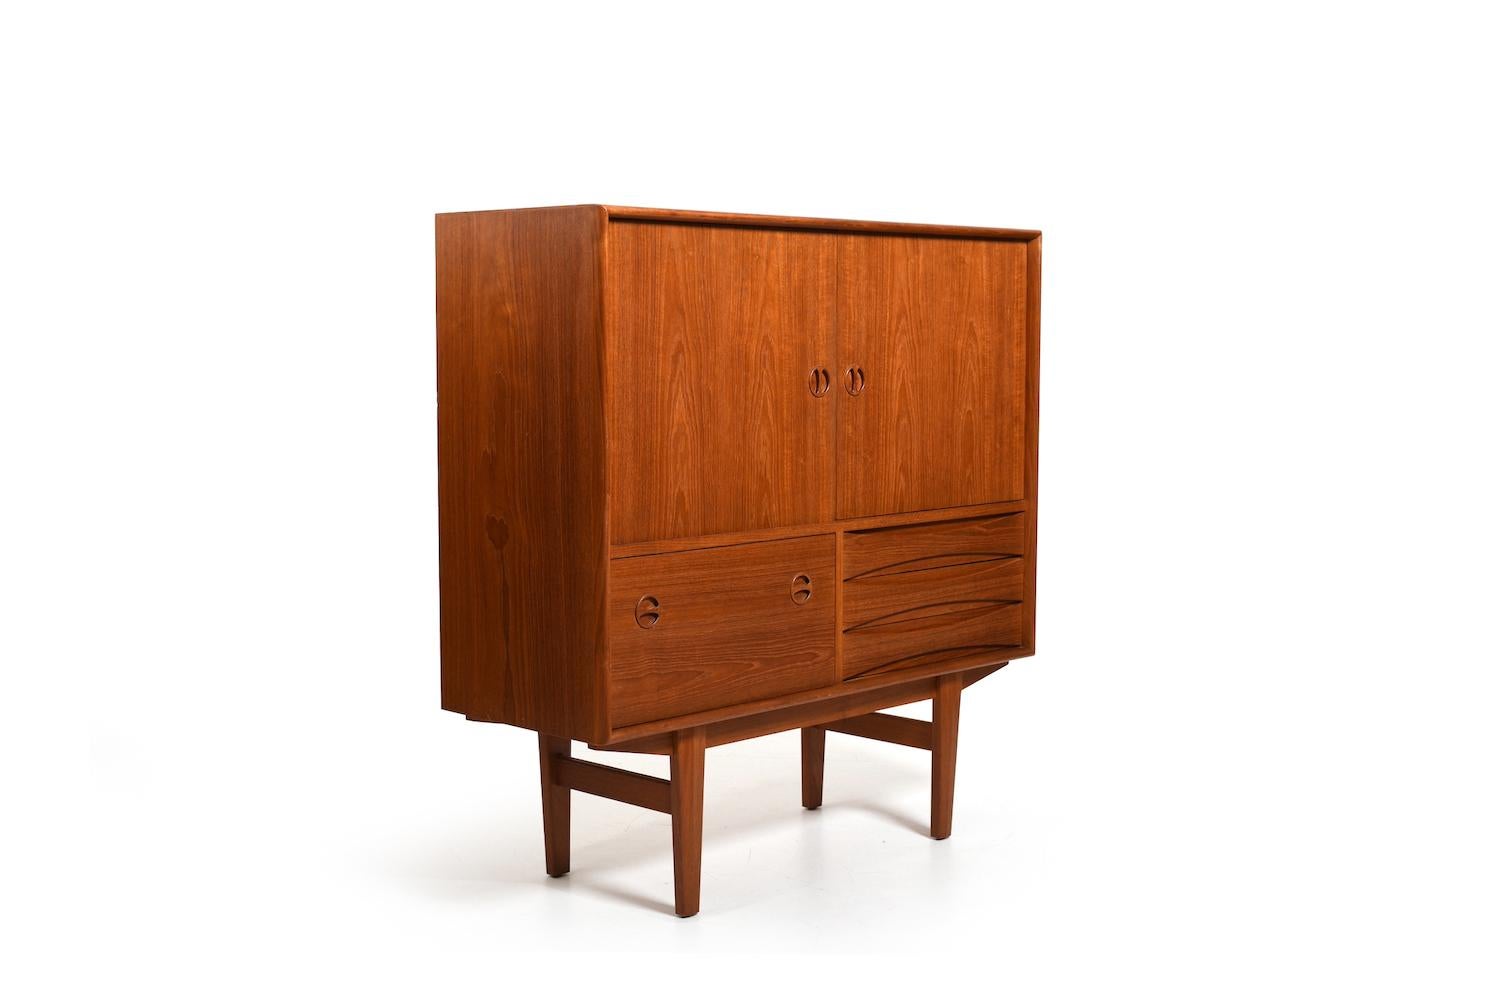 Elegant Danish teak cabinet with drawers and doors. We think it’s by Niels Clausen for N.C. Møbler Denmark. Often as described as Arne Vodder. It’s the same, very good quality. Prod. c. 1960.